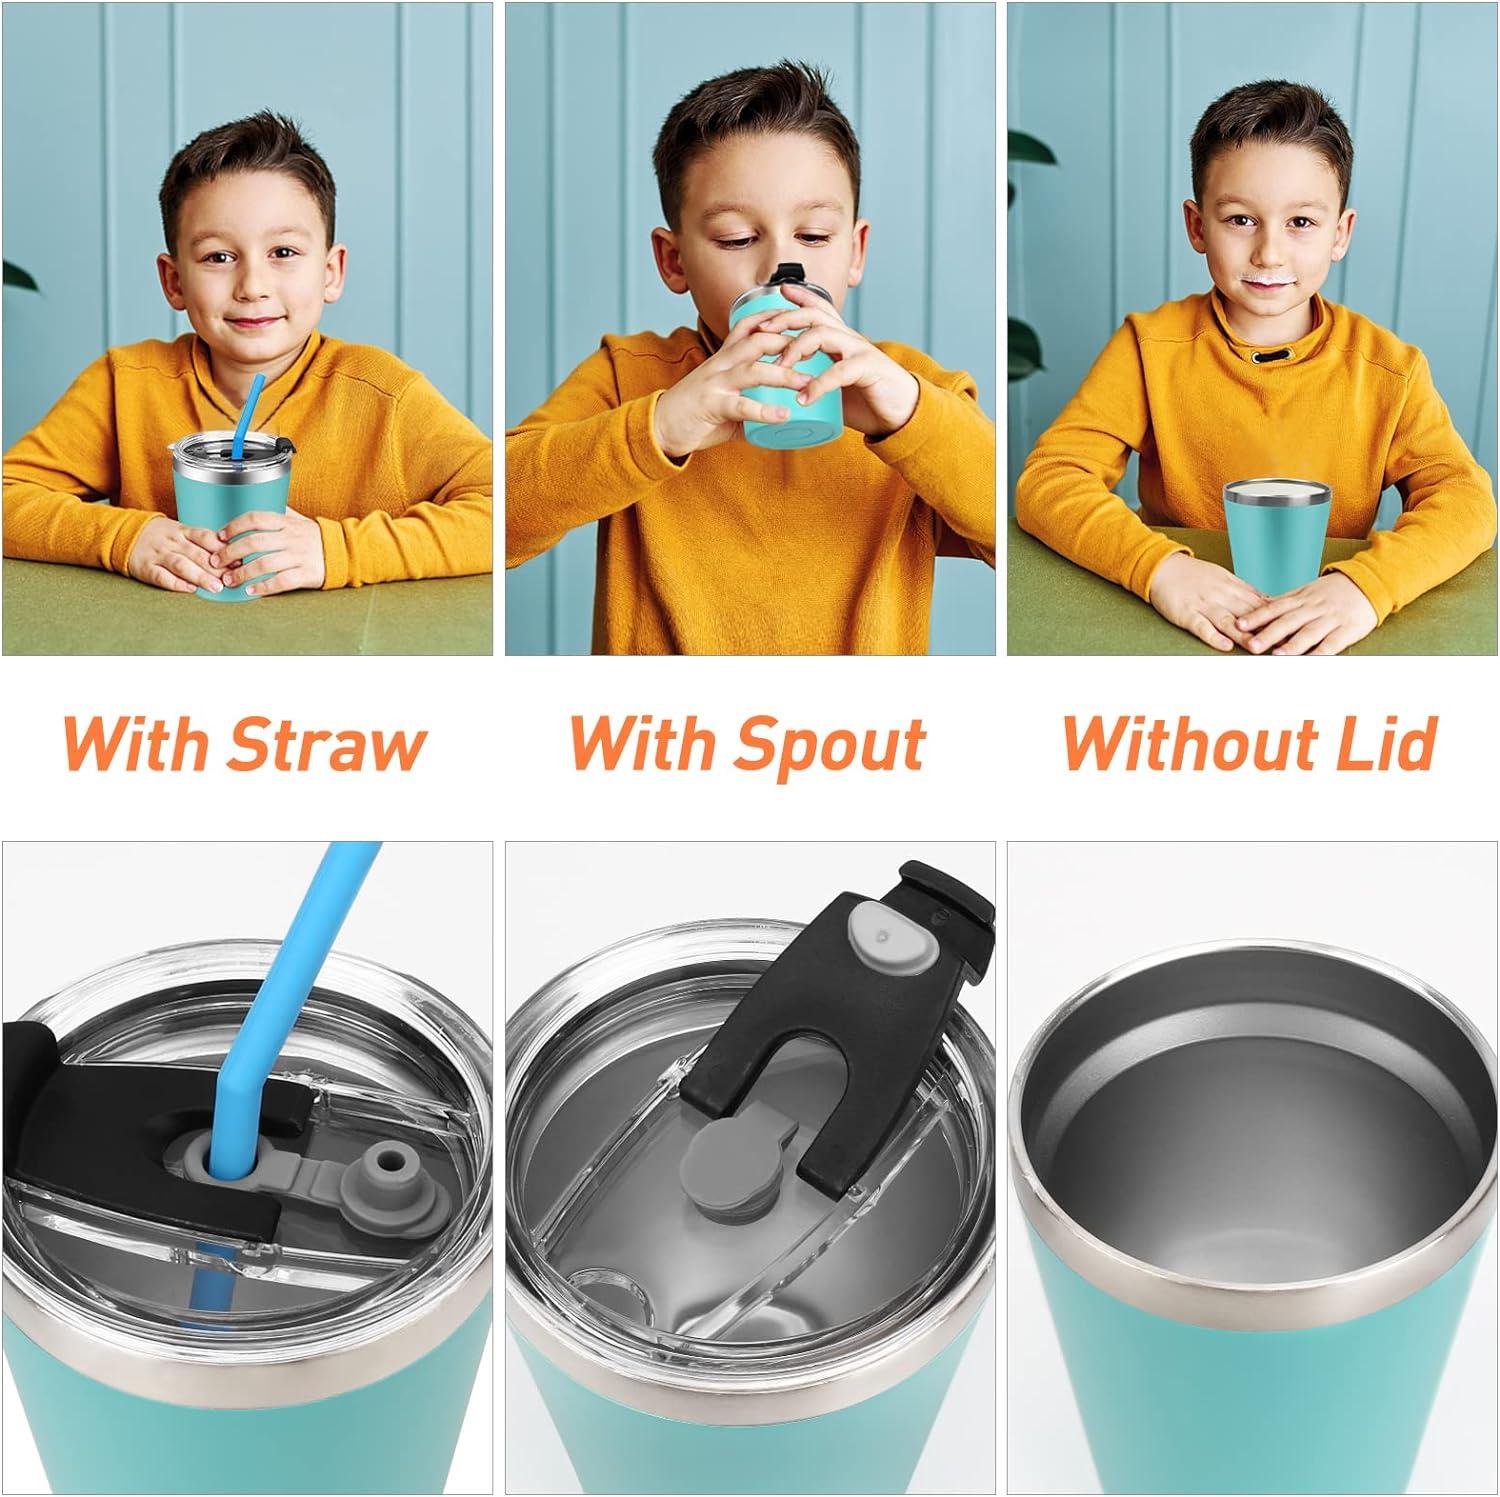 Vermida Kids Tumbler with Straw and Lid 4 Pack 8oz Spill Proof